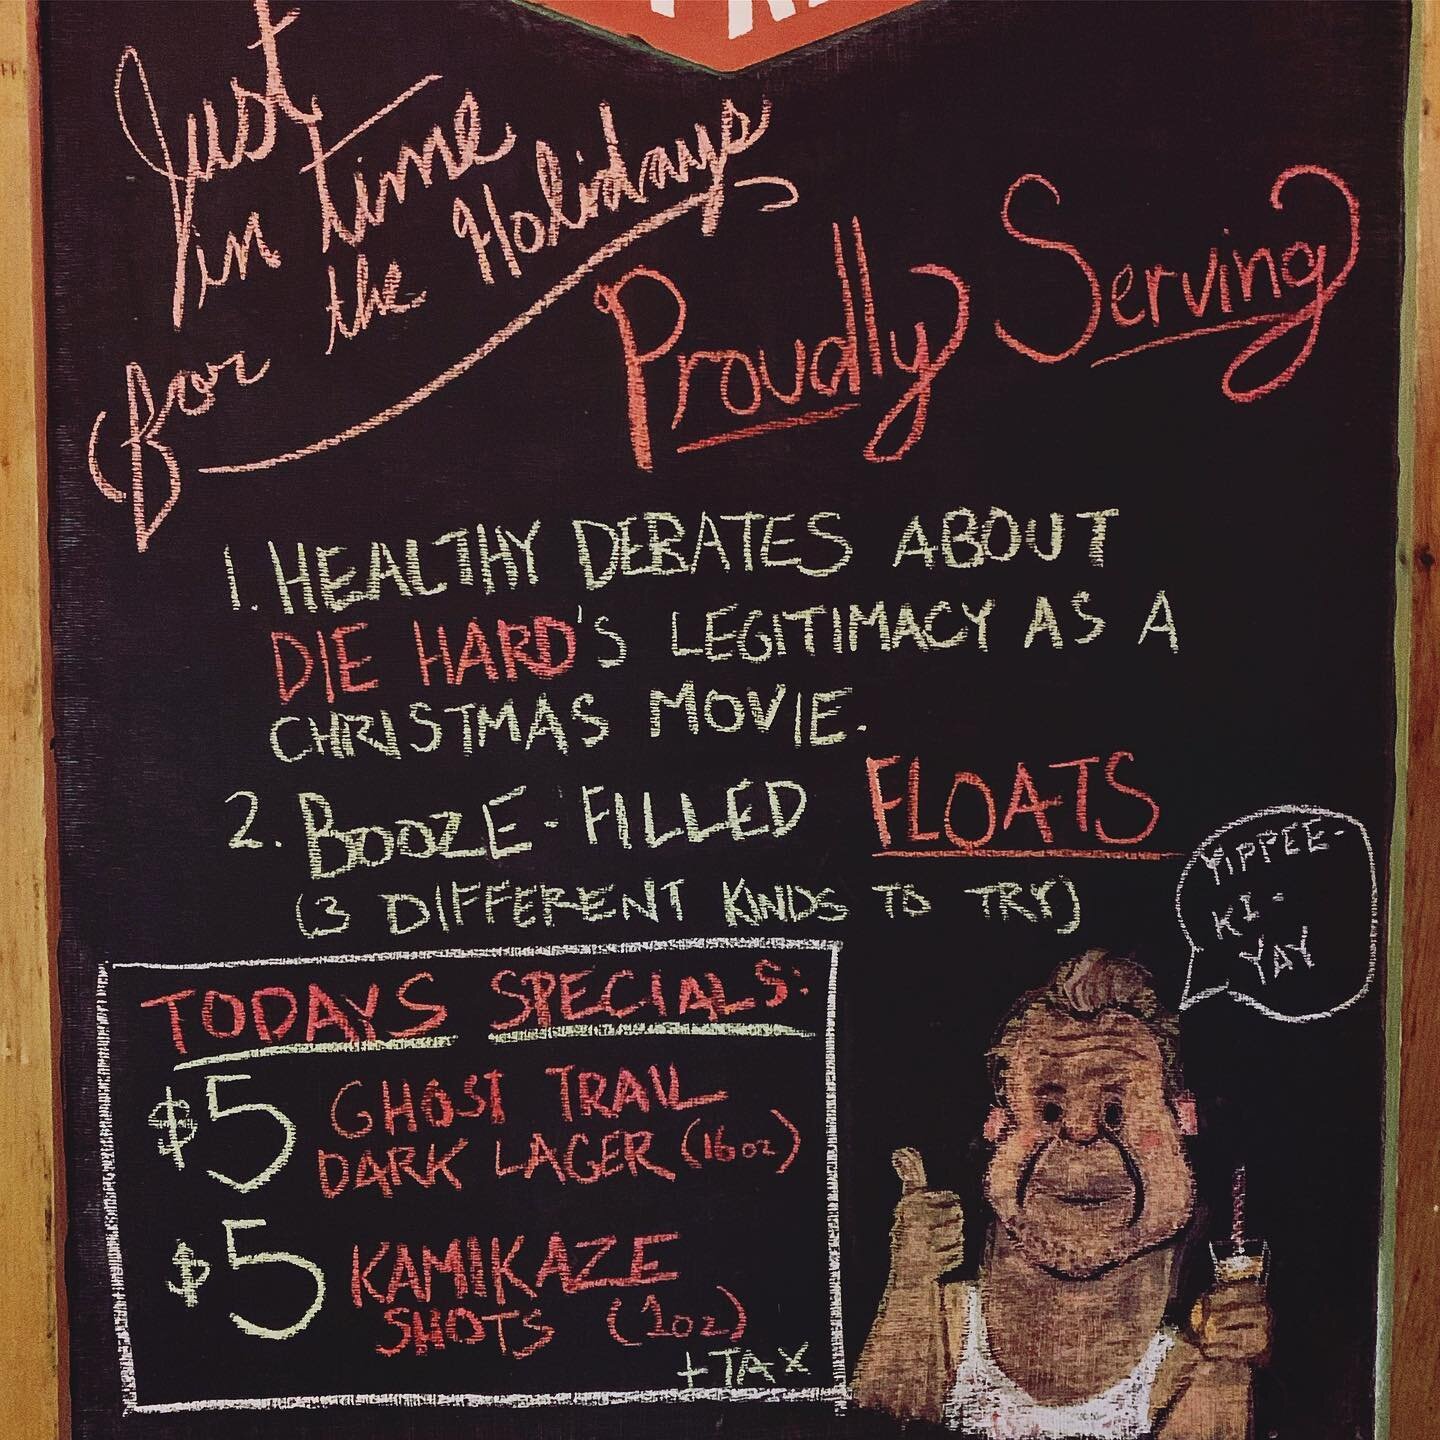 Die Hard, best #Christmas movie or best Christmas movie? And yes, we got booze-y floats now. Try a classic #bourbon and root beer with vanilla ice cream, our #creamsicle, or the coffee-holic, made with j&auml;germeister cold brew! Stay tuned for pics